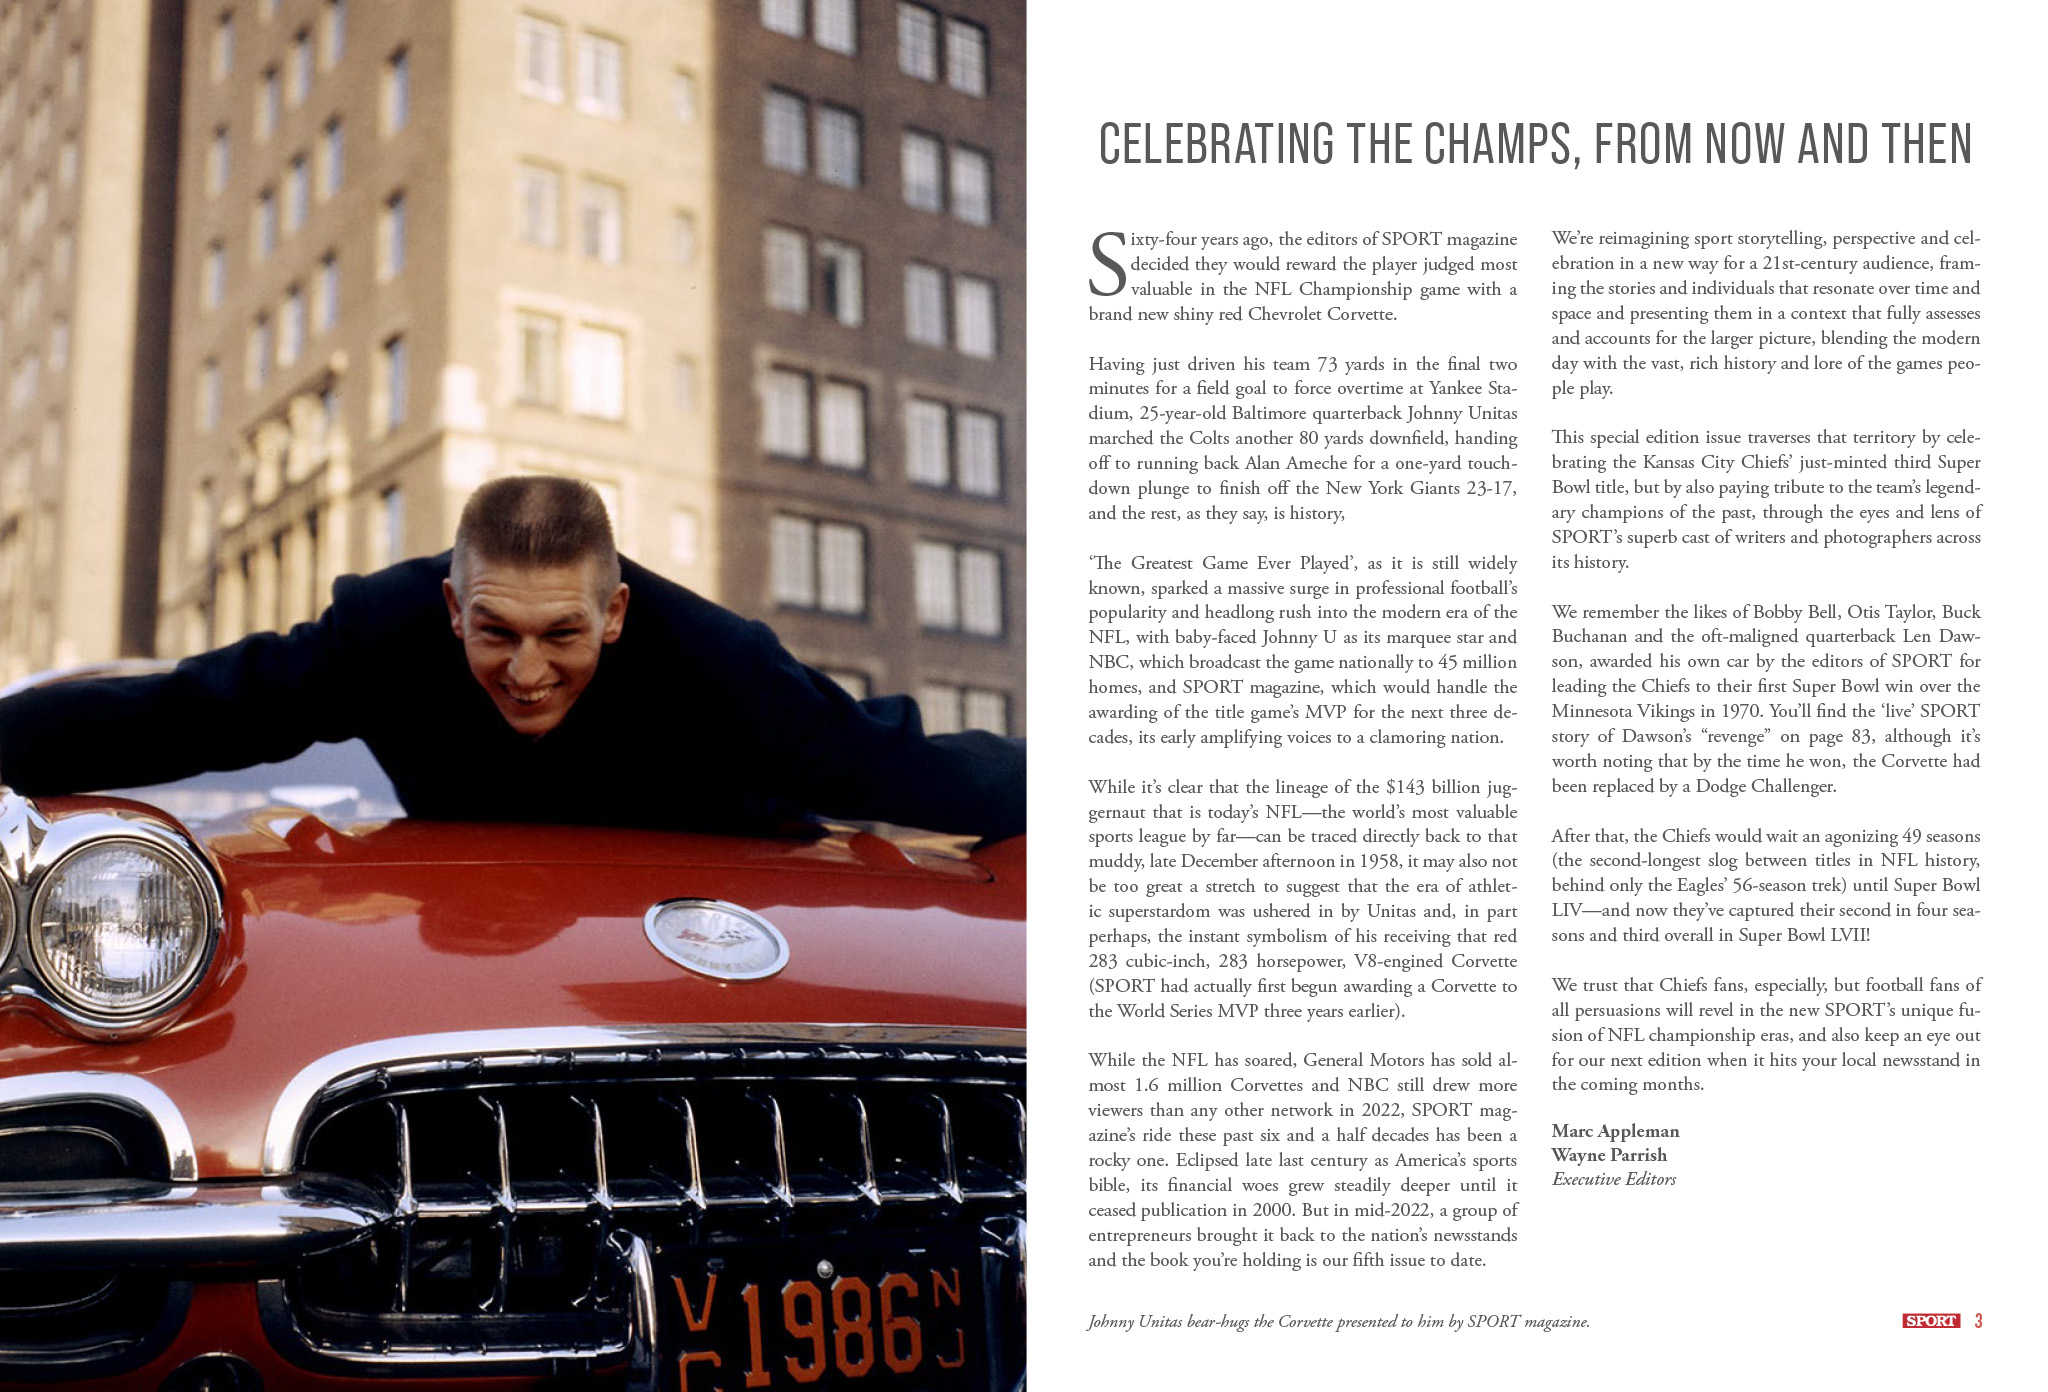 Vintage Sport magazine photo of Johnny Unitas on the hood of his MVP car, in two page introductory editorial spread